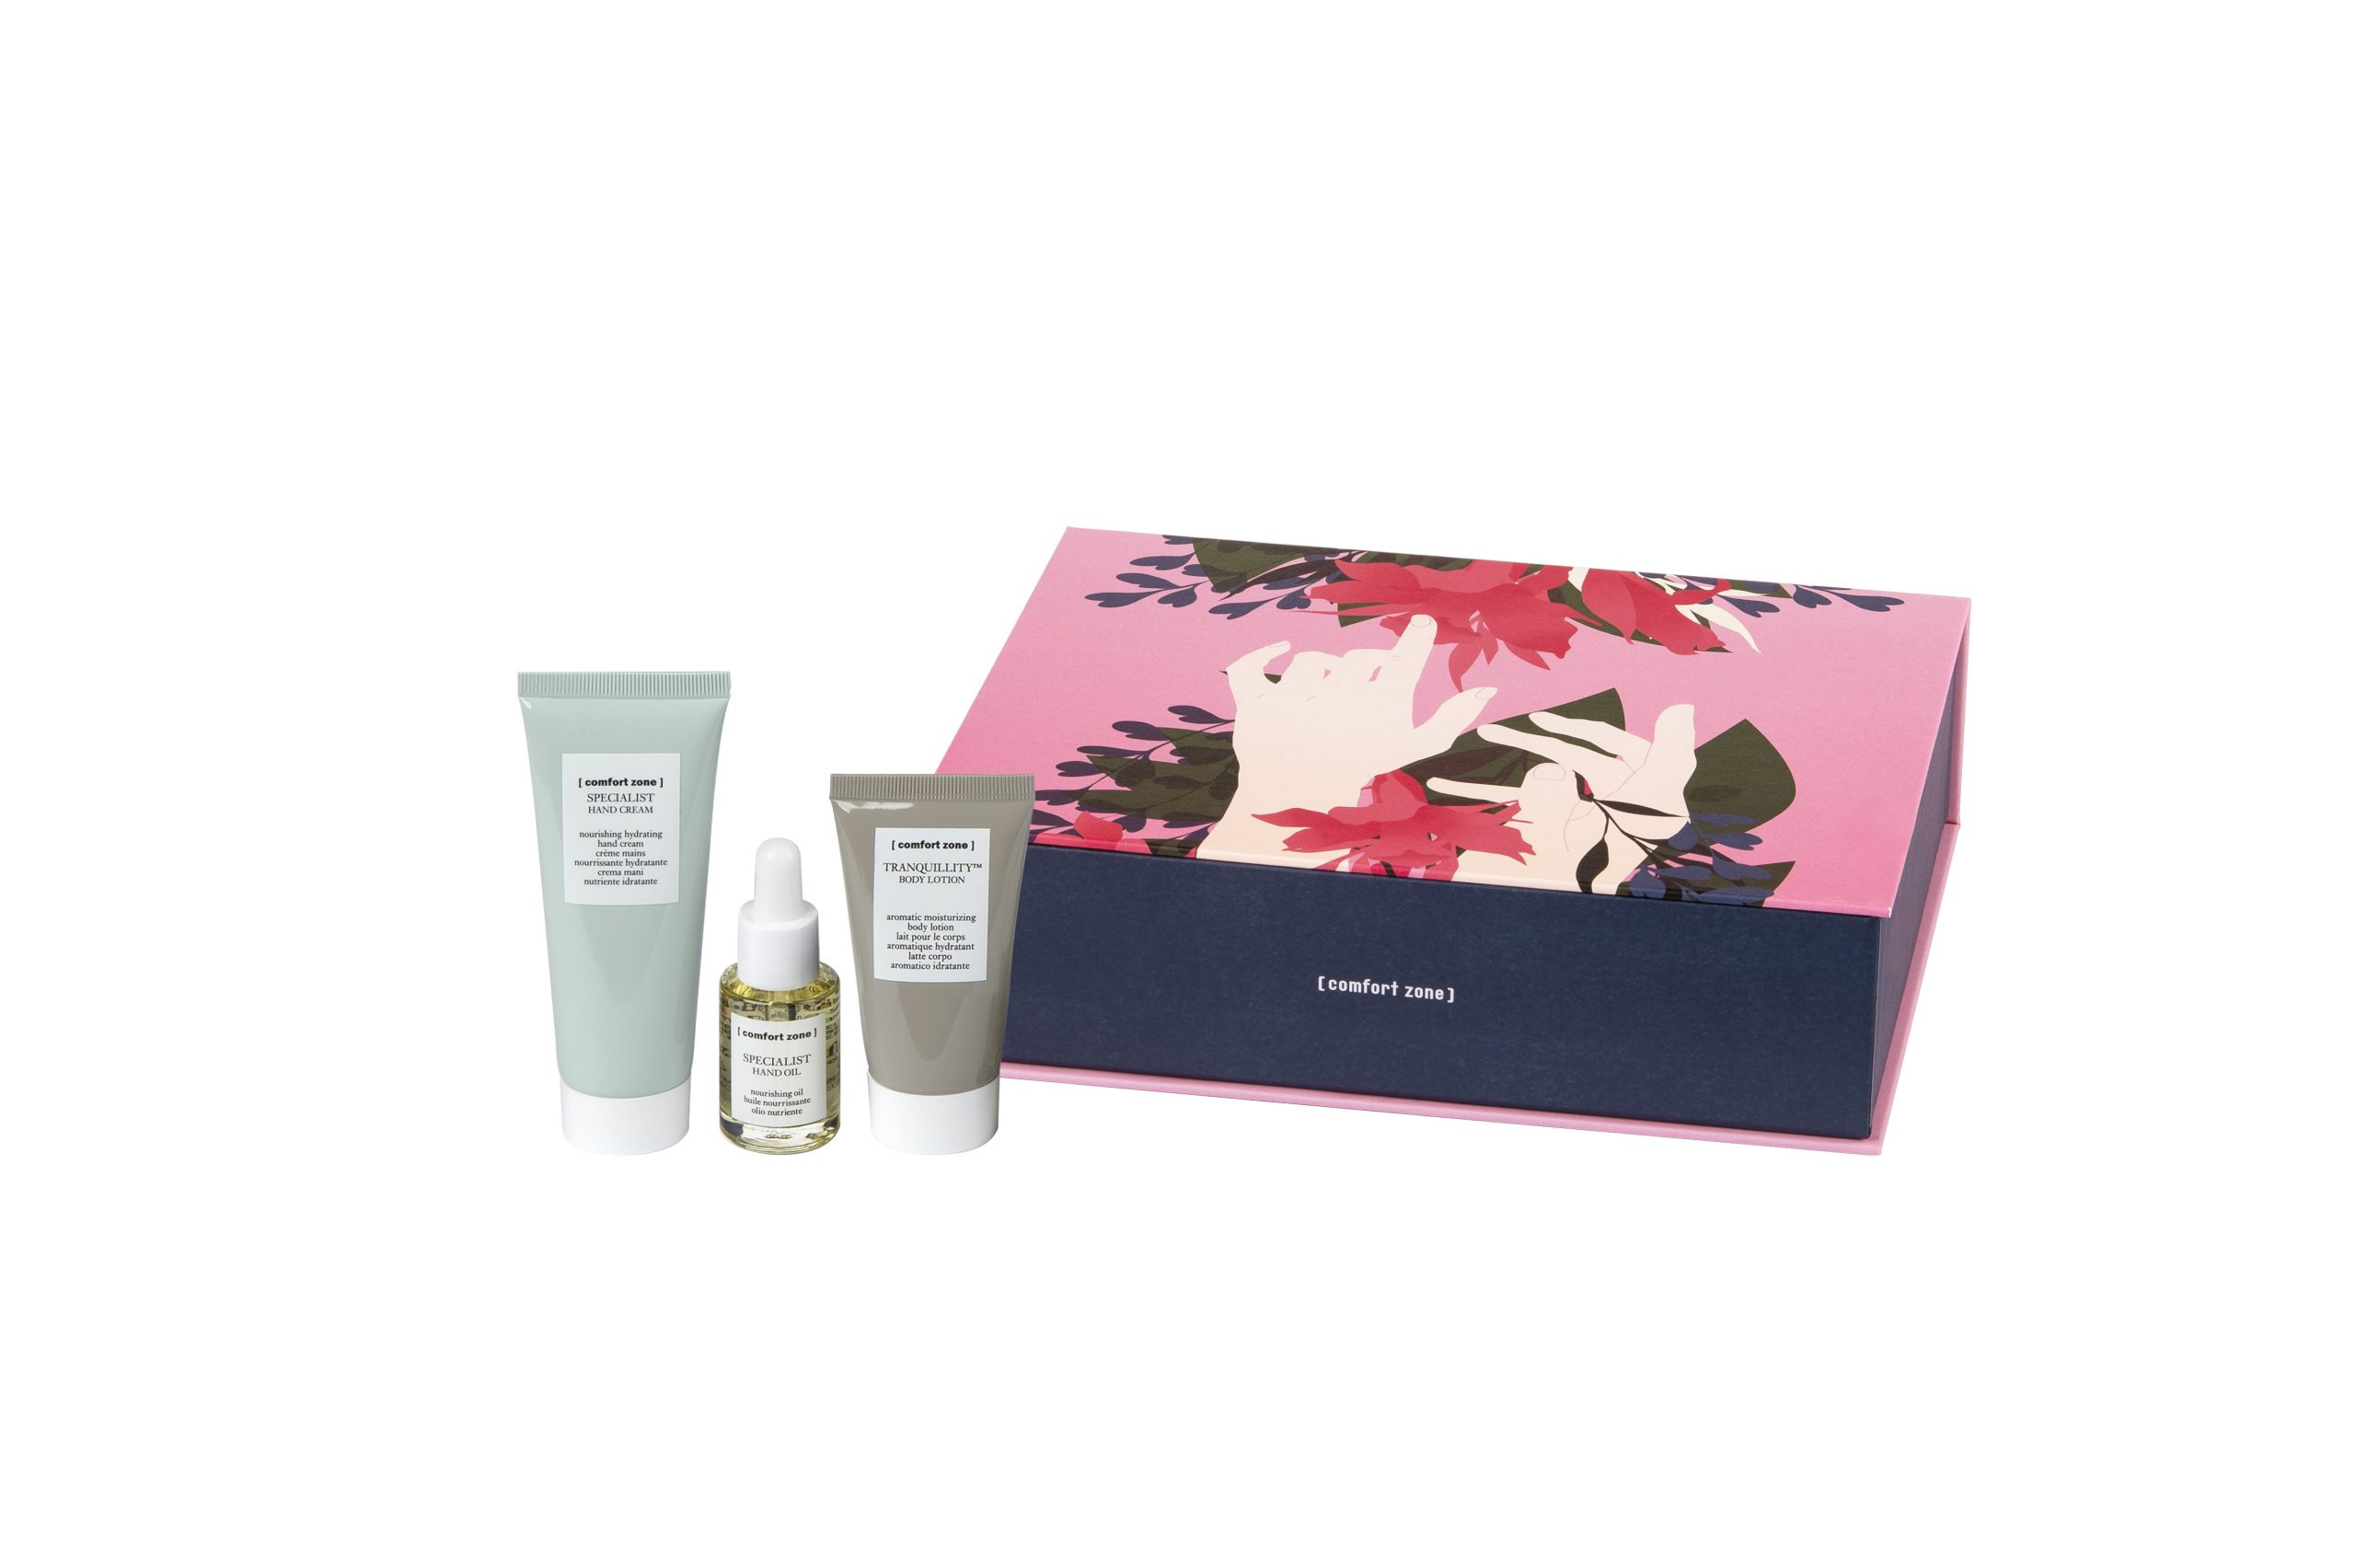 SPECIAL HAND AND BODY RITUAL KIT (WORTH £46.75)